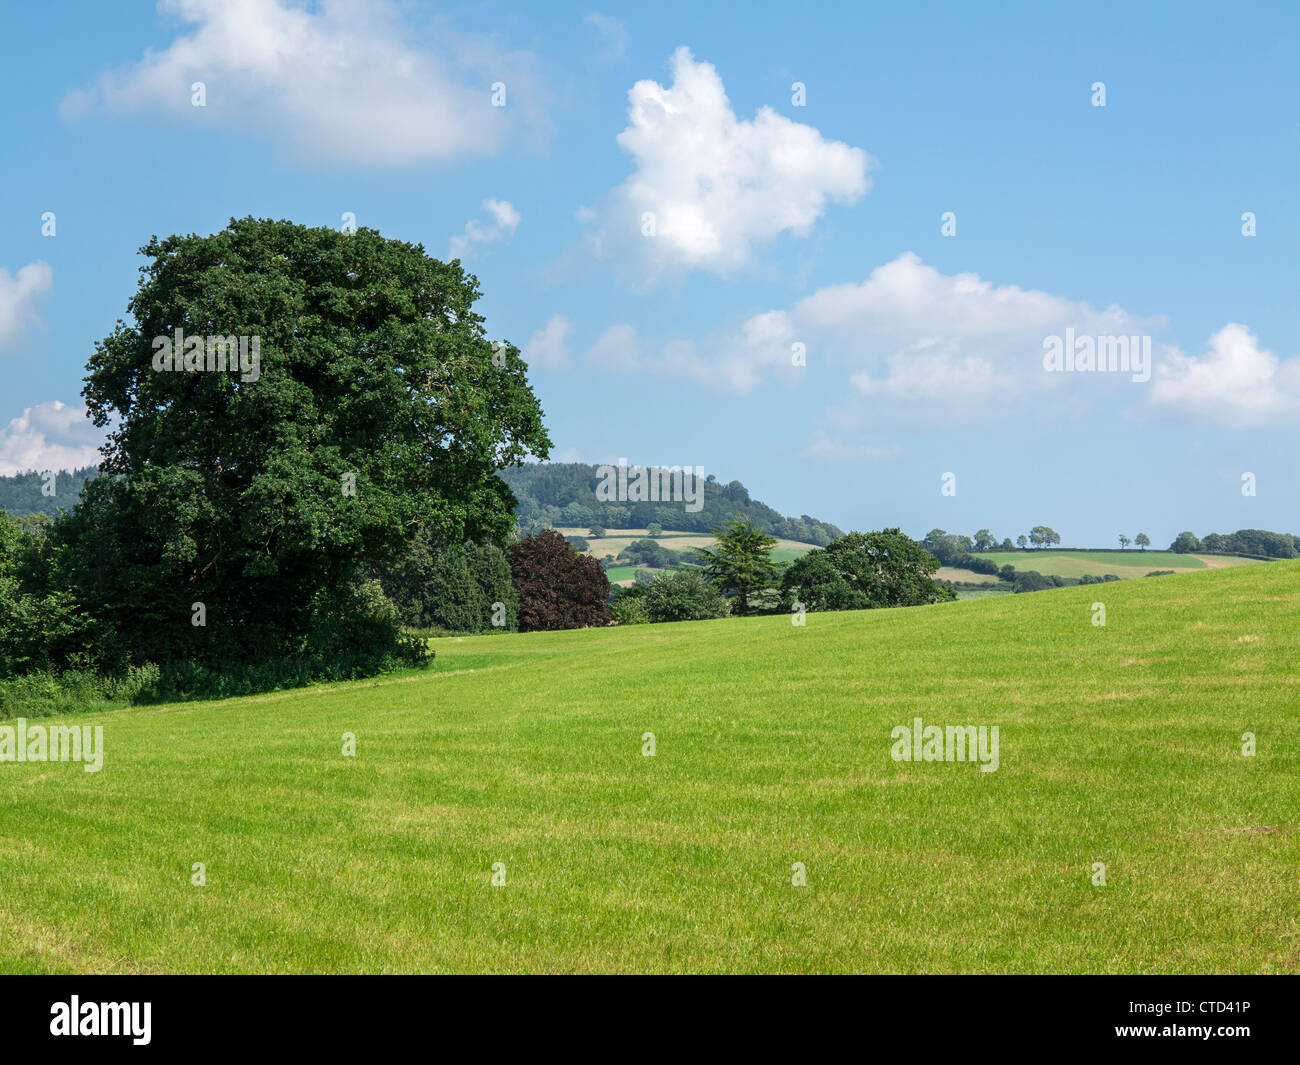 Rural scene of a grass field and blue sky with a few light clouds Stock Photo